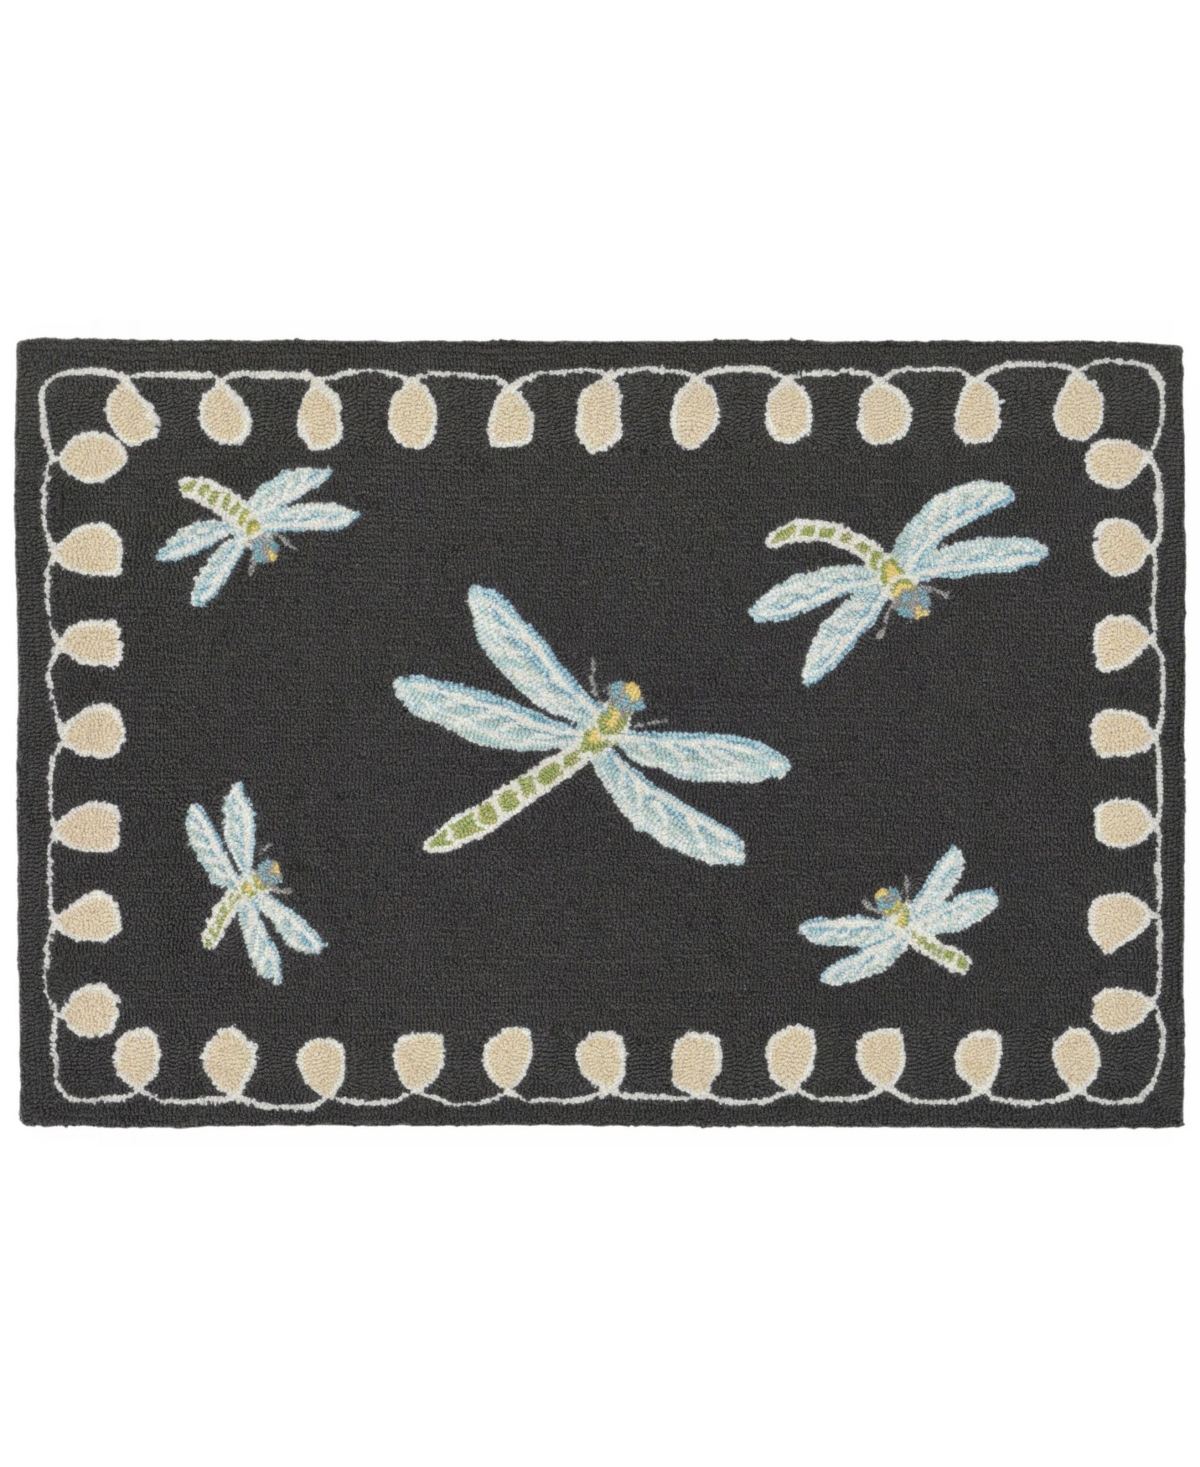 Liora Manne Frontporch Dragonfly Black And Gray 2' X 3' Outdoor Area Rug In Black,gray